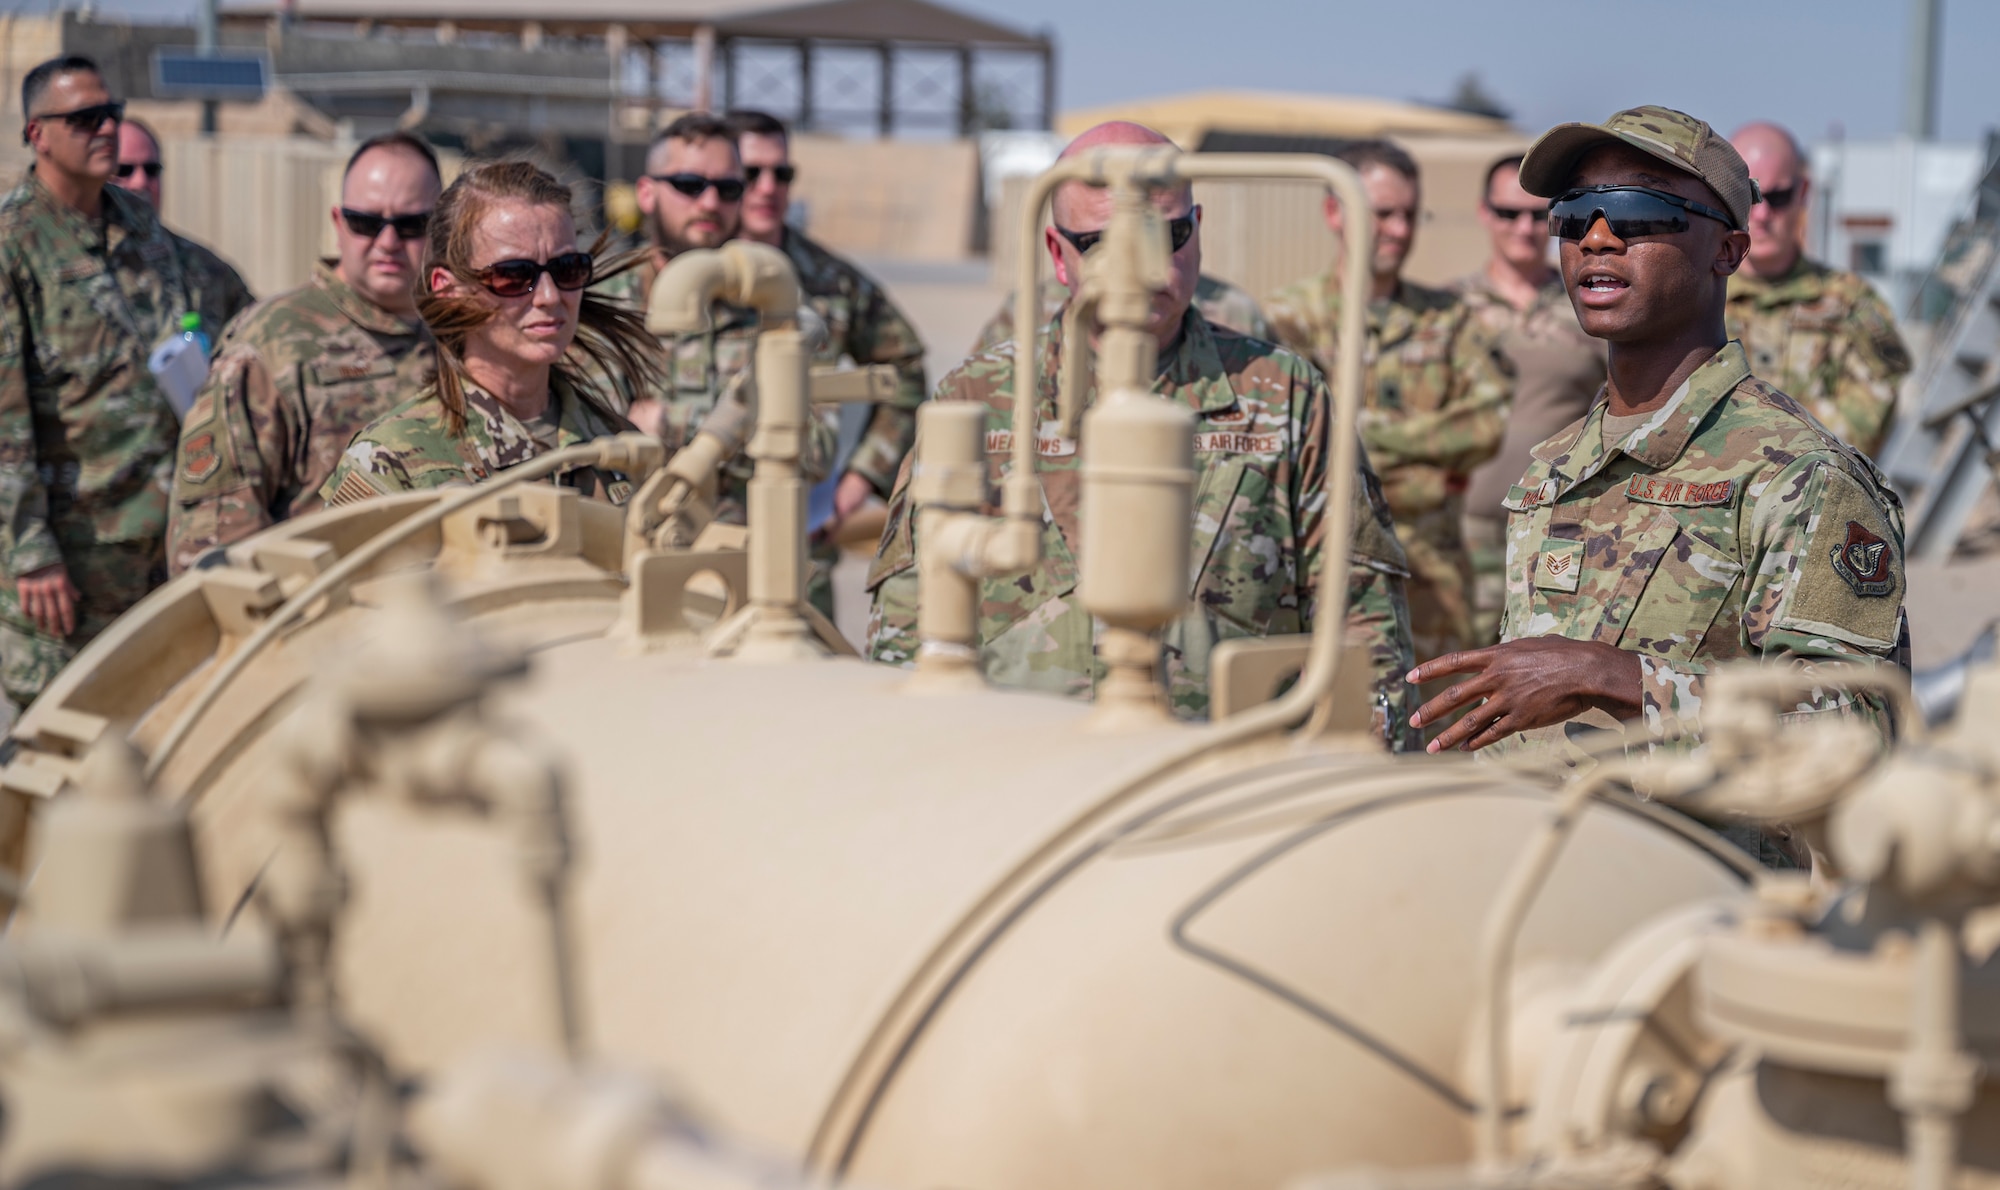 U.S. Air Force Staff Sgt. Raymond Randall, a fuels facility technician assigned to the 386th Expeditionary Logistics Readiness Squadron, discusses fuel operations with Airmen at Ali Al Salem Air Base, Kuwait, on Oct. 15, 2021.